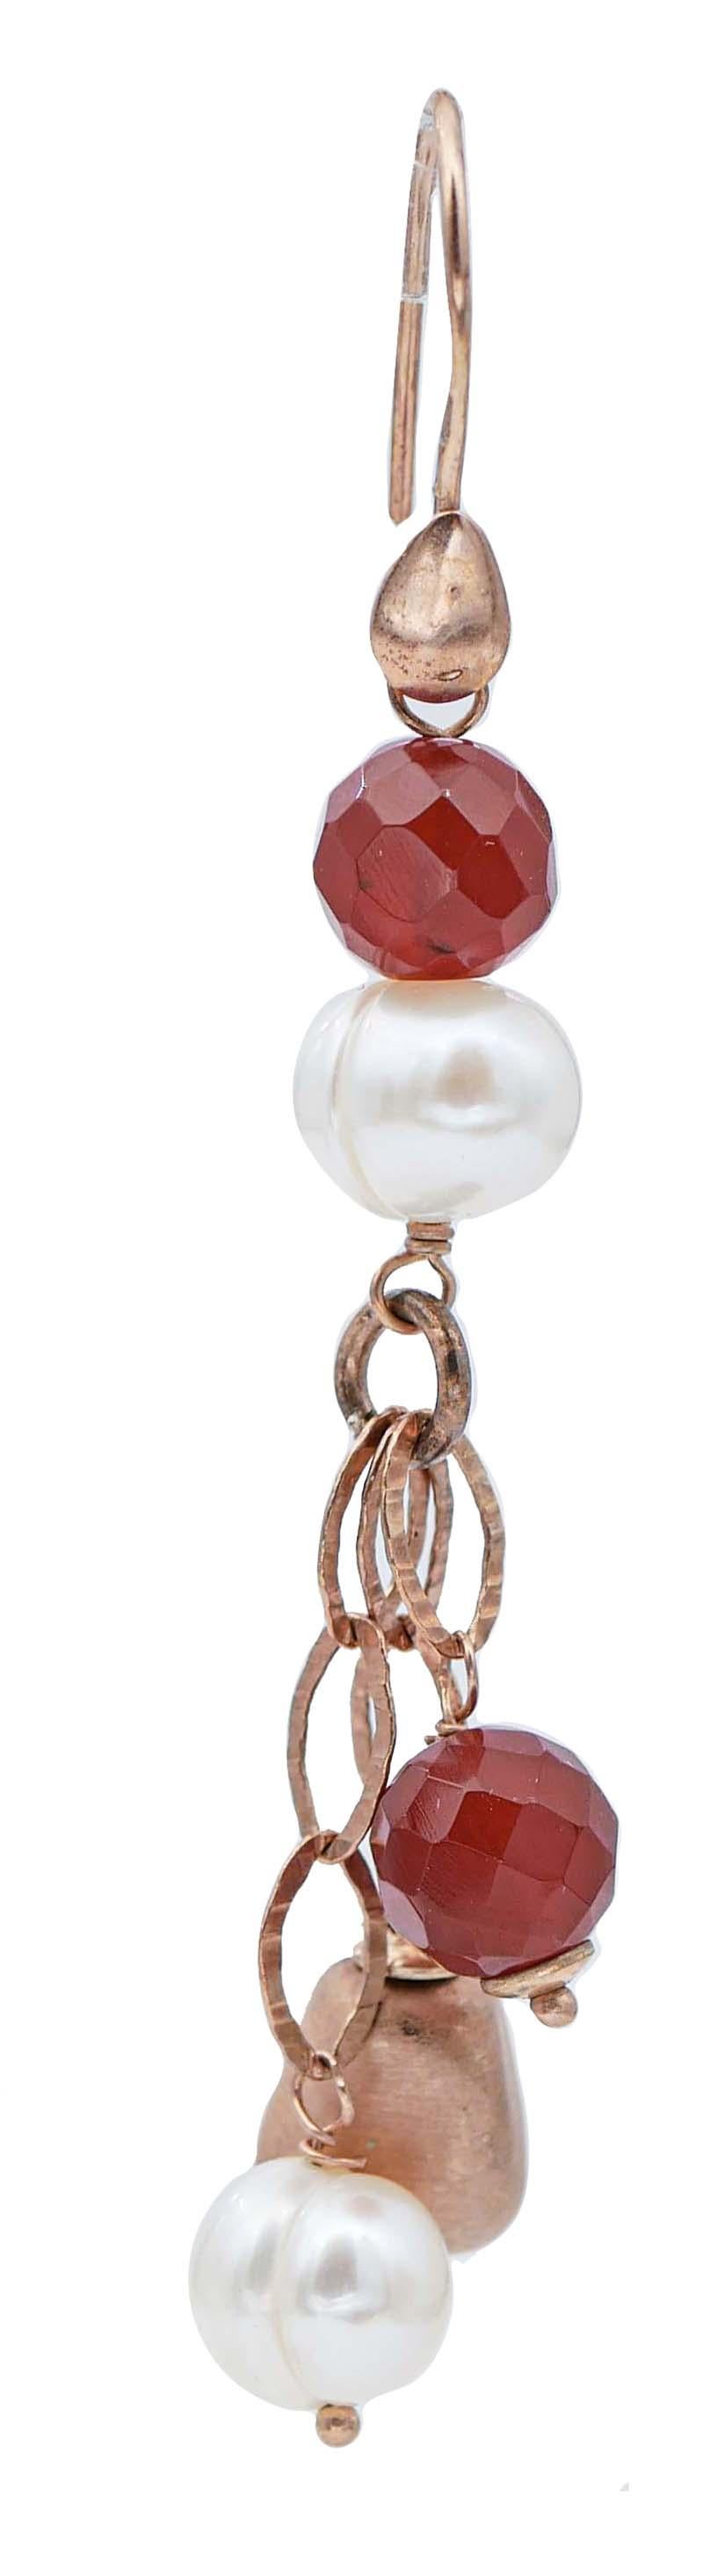 SHIPPING POLICY: 
 Shipping costs will be totally covered by the seller

Simple retrò earrings in silver structure mounted with carnelian and pearls.
These earrings were totally handmade by Italian master goldsmiths and they are in perfect